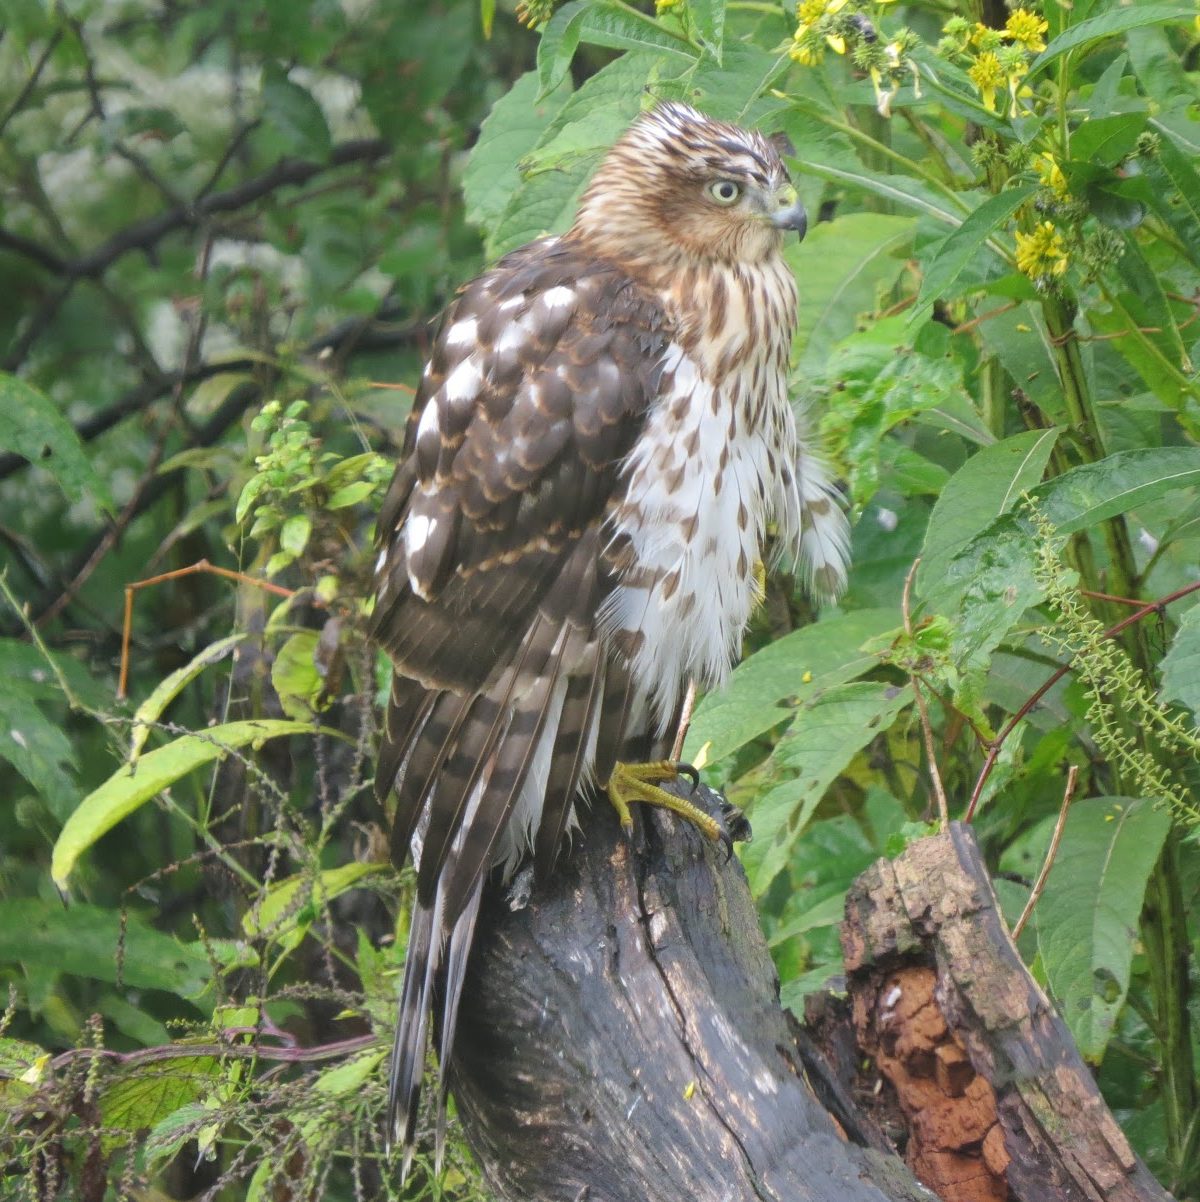 close up of a cooper's hawk resting on a tree branch with green plants in the background